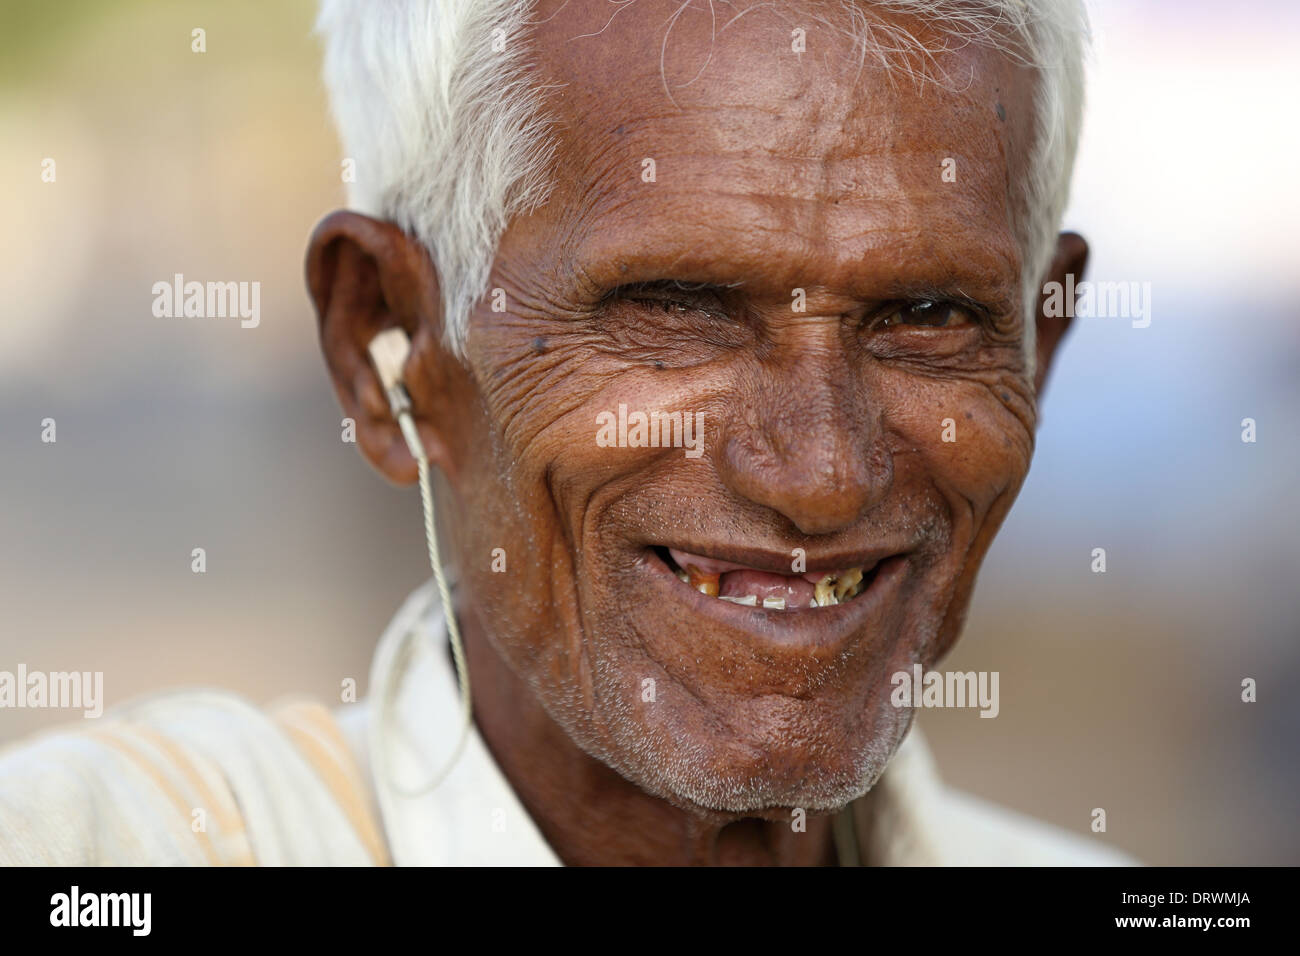 Old Indian man with hearing aid Stock Photo